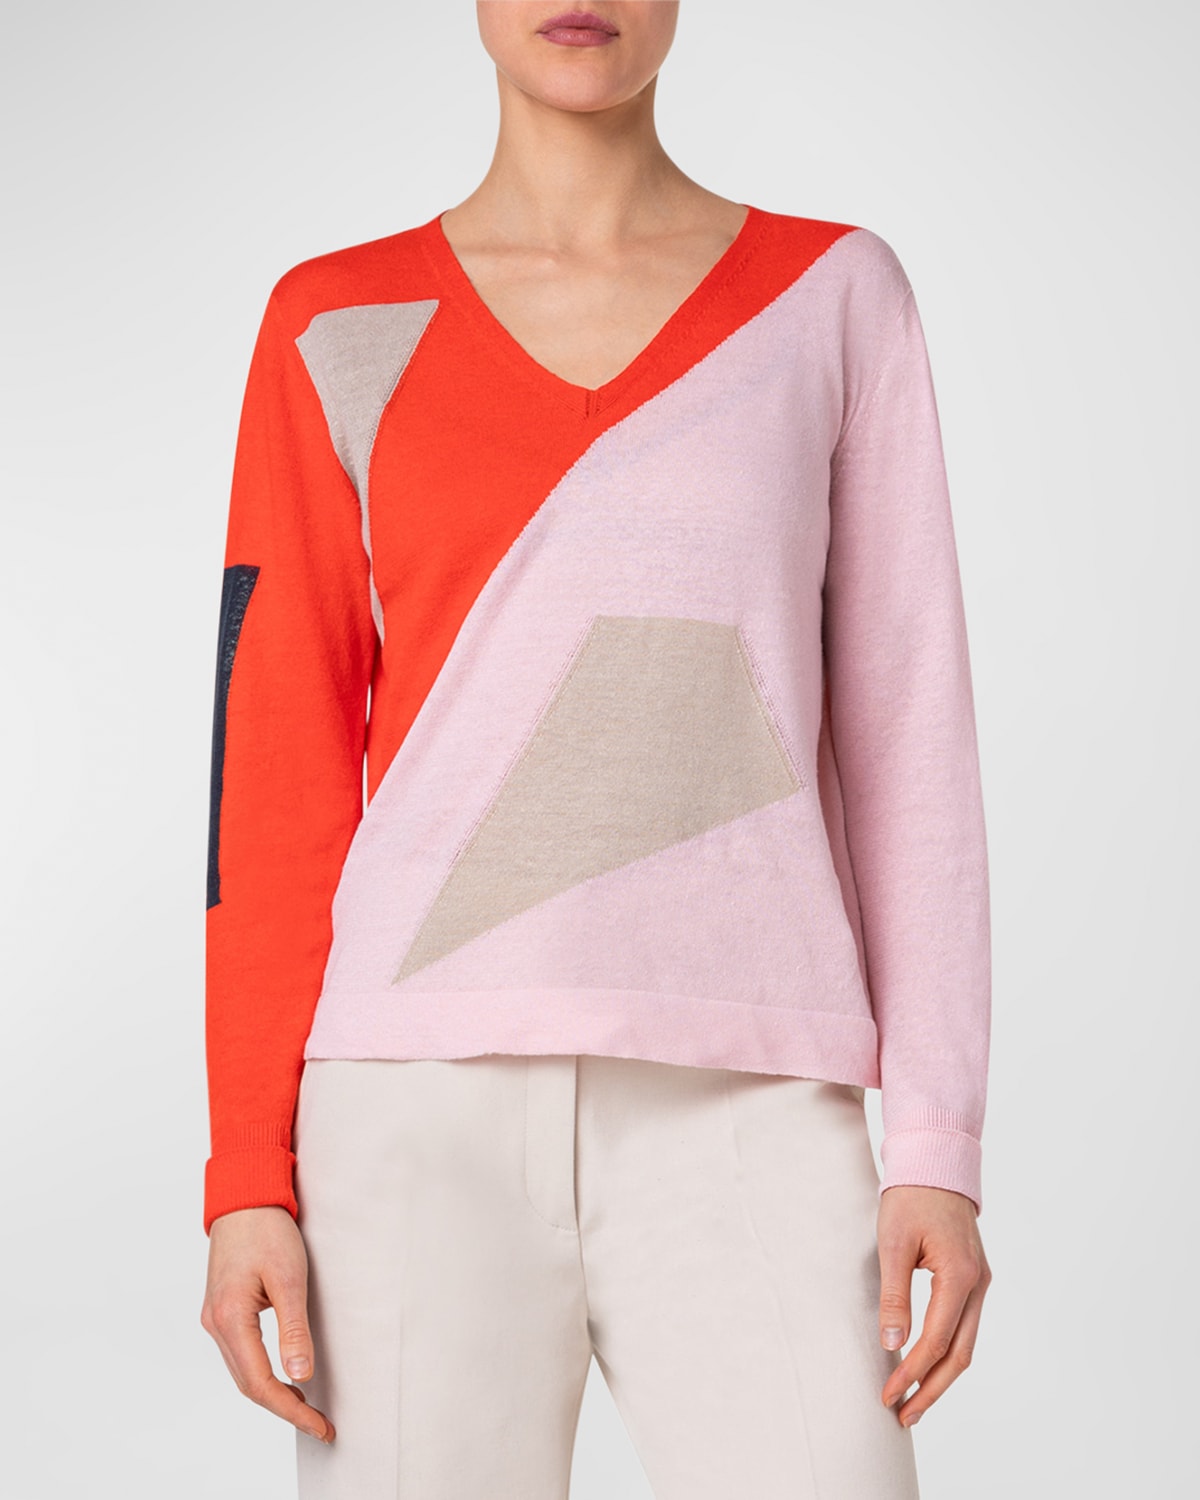 Cotton and Linen Knit Sweater with Spectra Intarsia Details